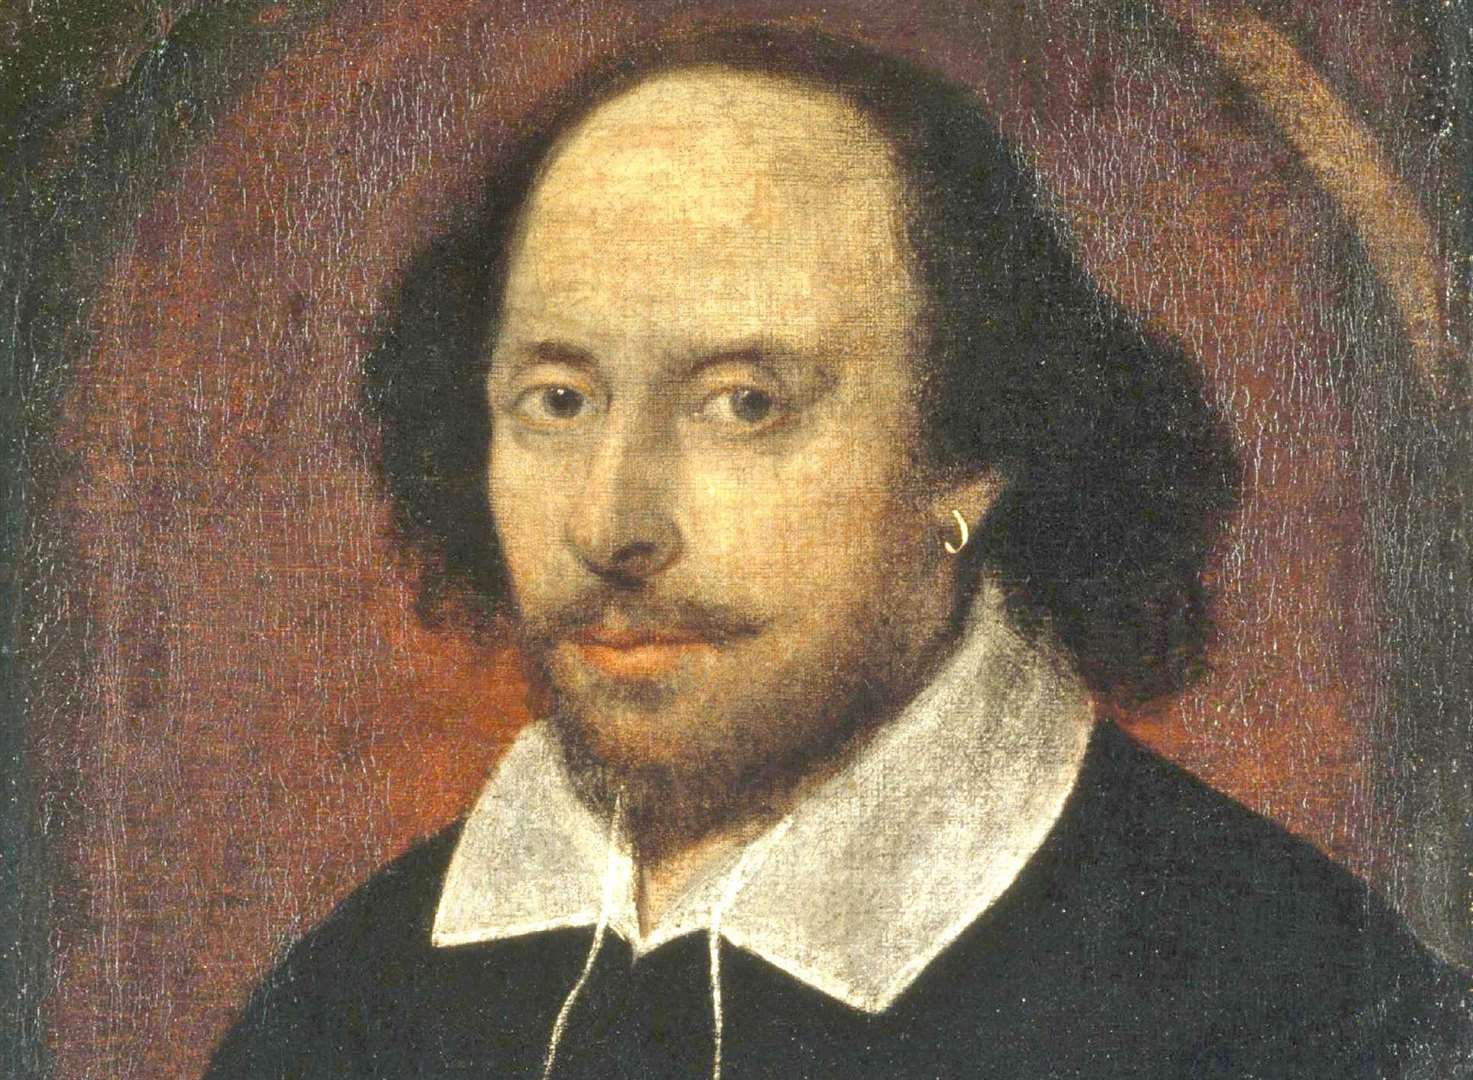 William Shakespeare is believed to have performed with the King’s Players - a London-based theatre company - in Fordwich in 1605